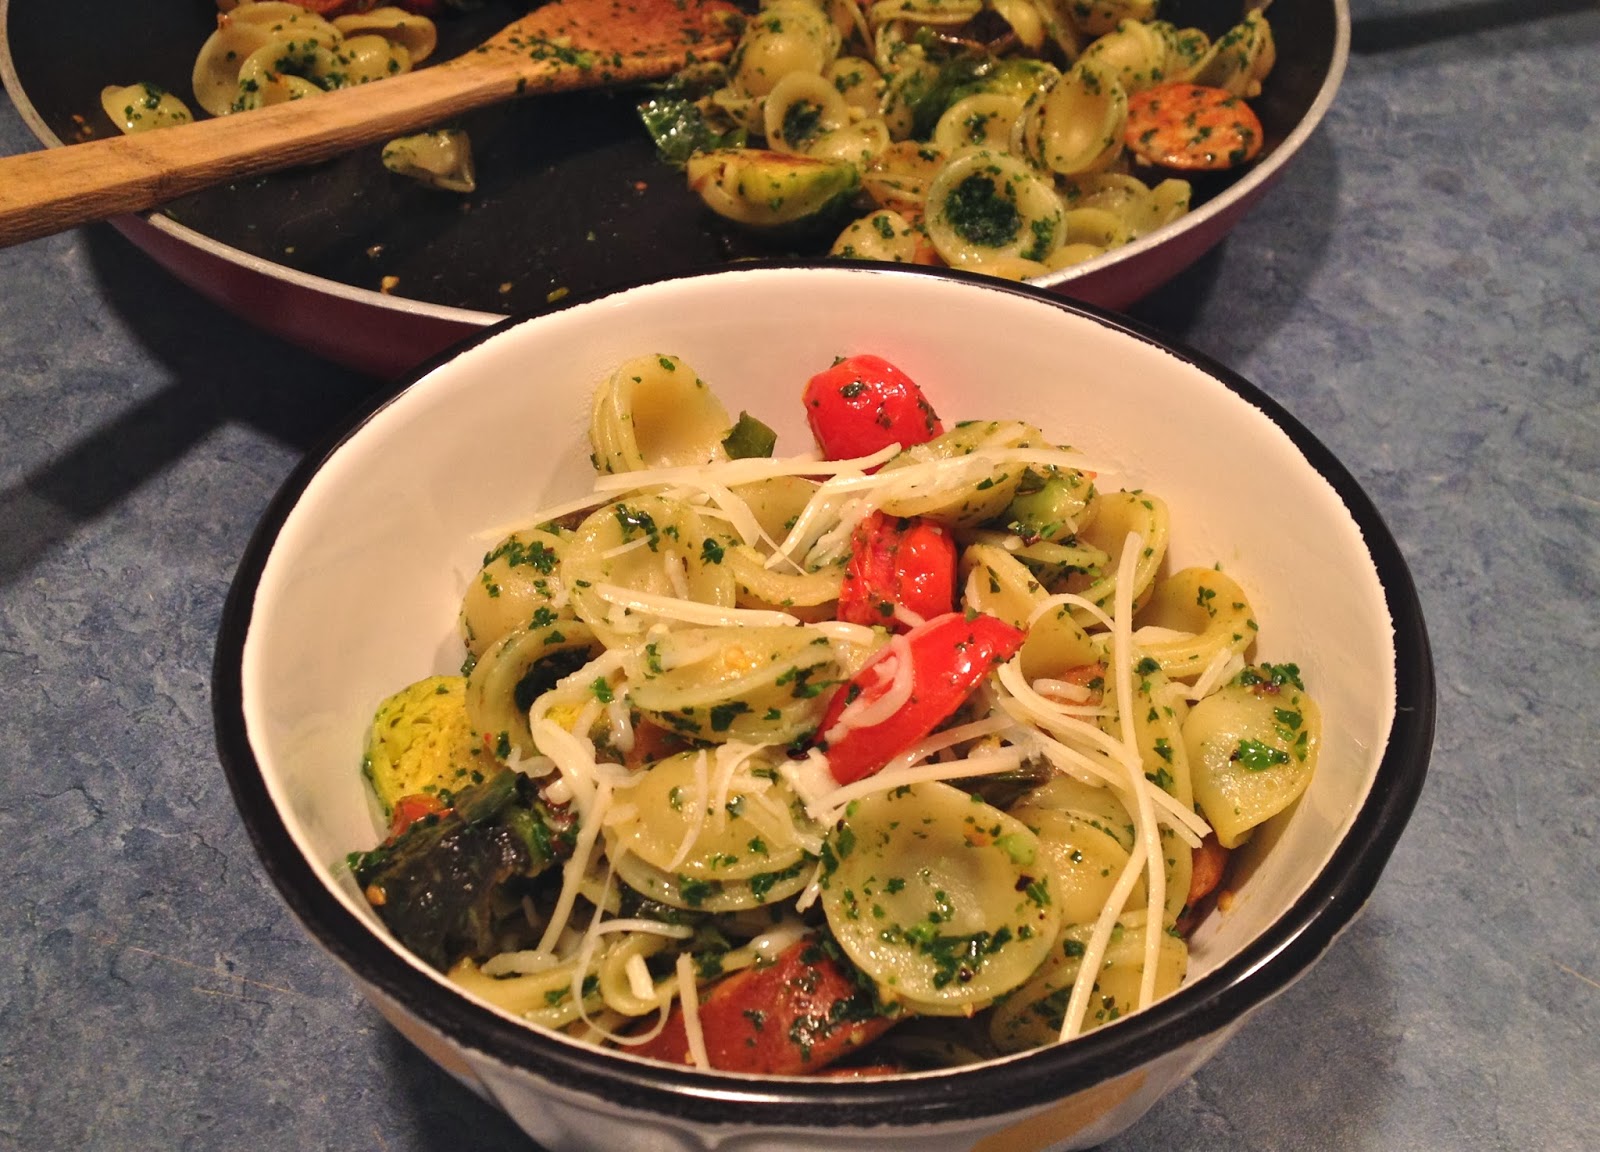 Pesto Orecchiette with Roasted Brussel Sprouts and Chicken Sausage